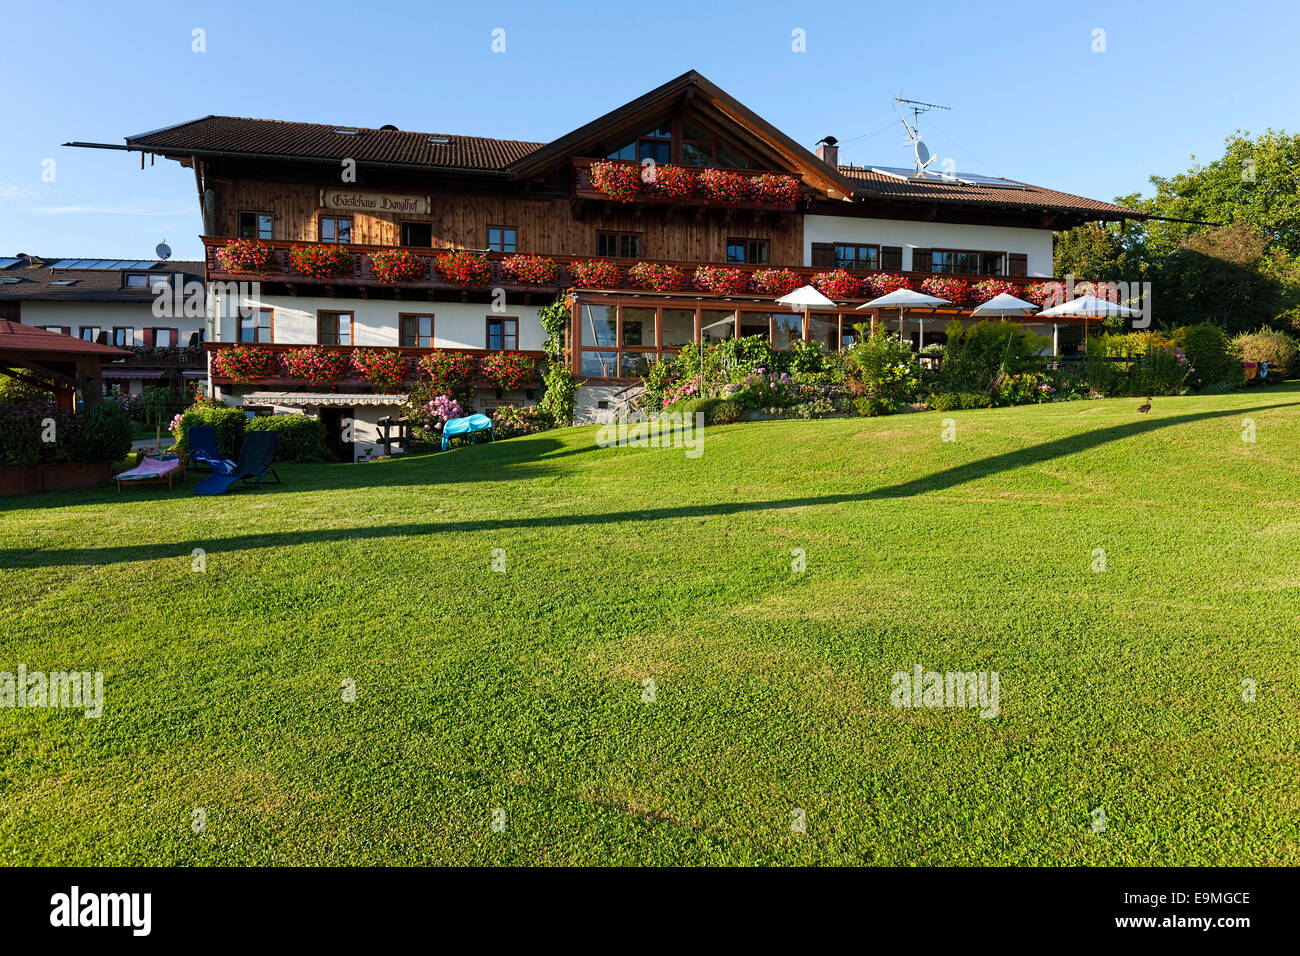 German holiday Guest house, Chiemsee, Chiemgau, Breitbrunn, Upper Bavaria, Germany, Europe Stock Photo